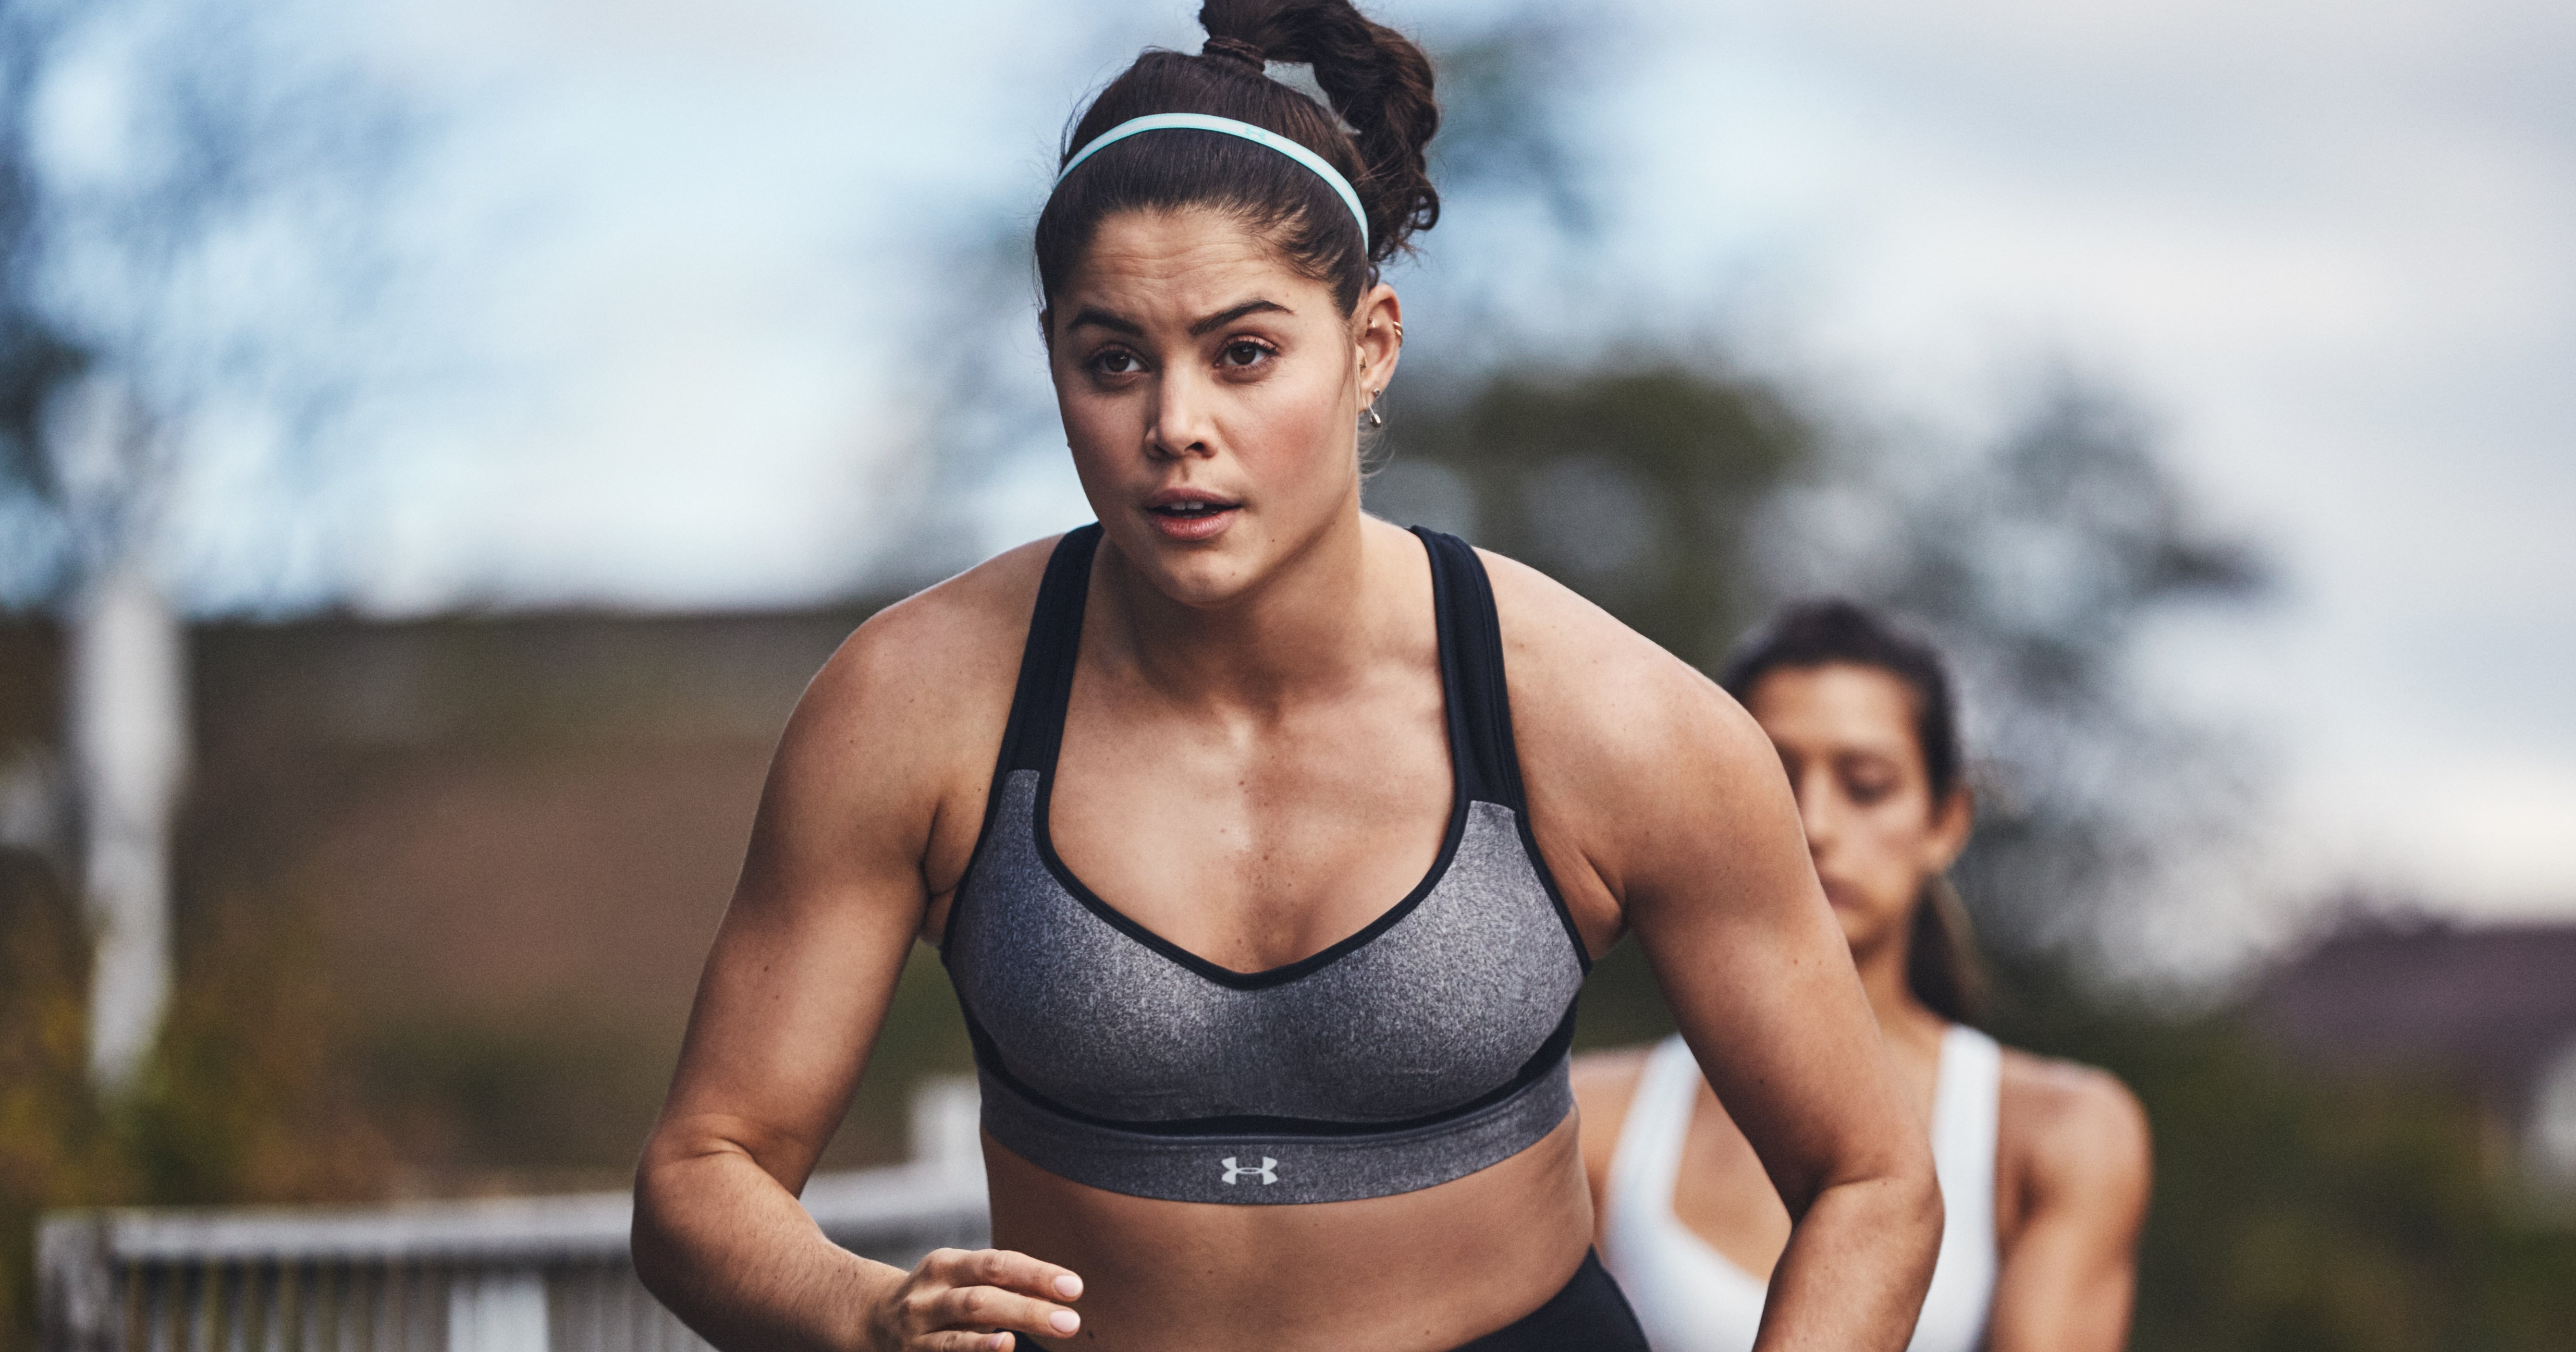 Is your sports bra affecting your breathing? The new research you